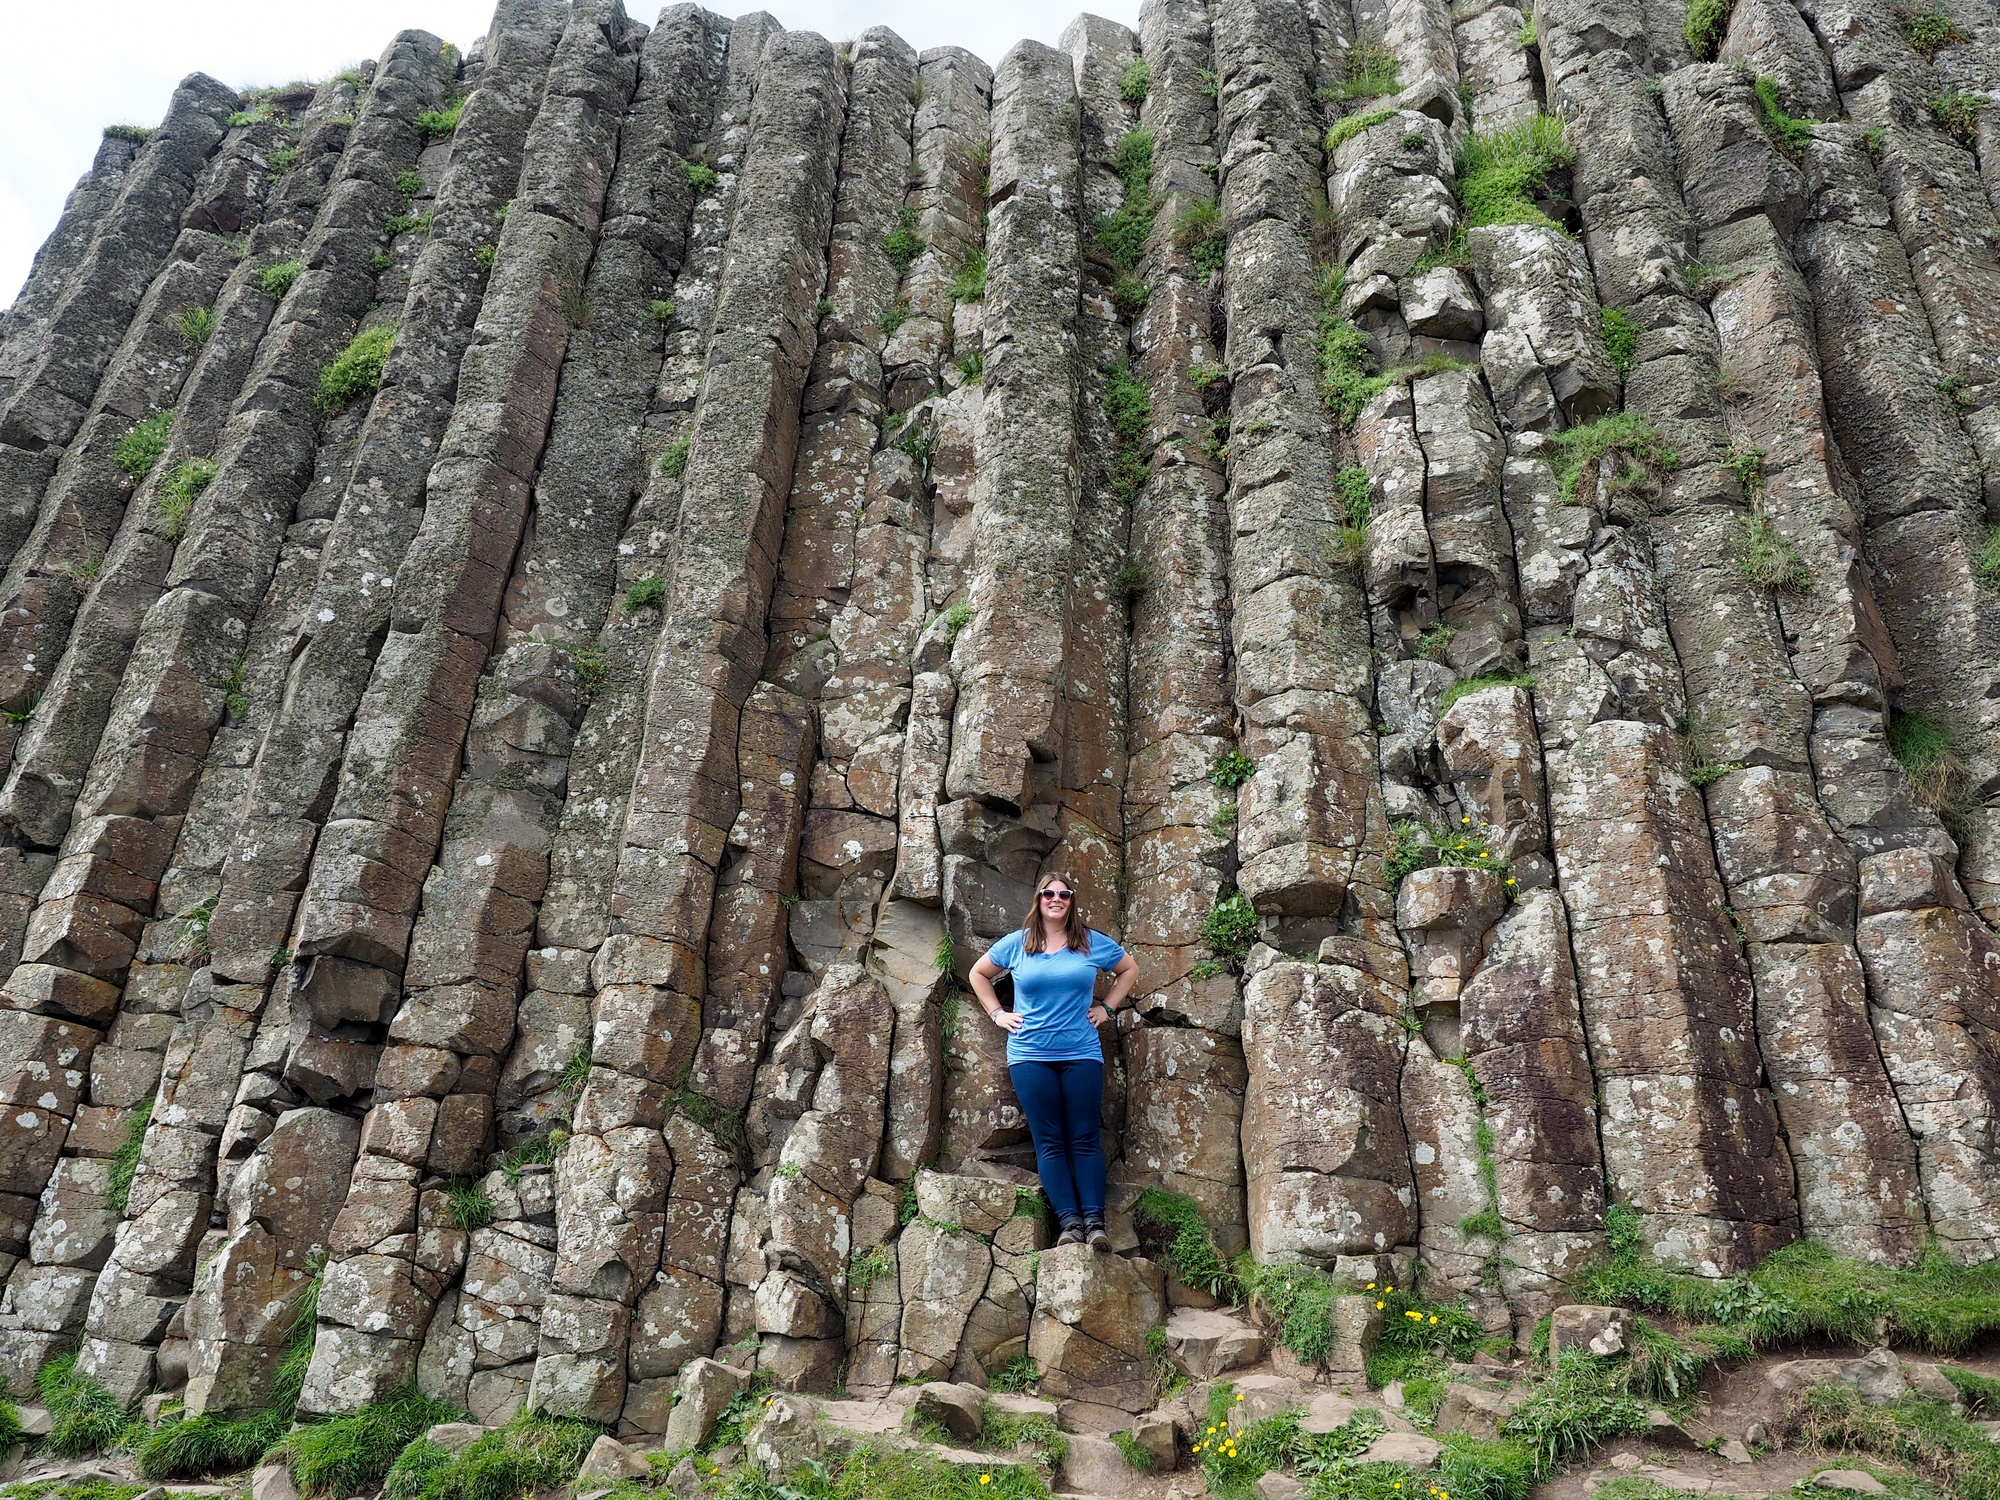 Visiting Giant's Causeway in Northern Ireland